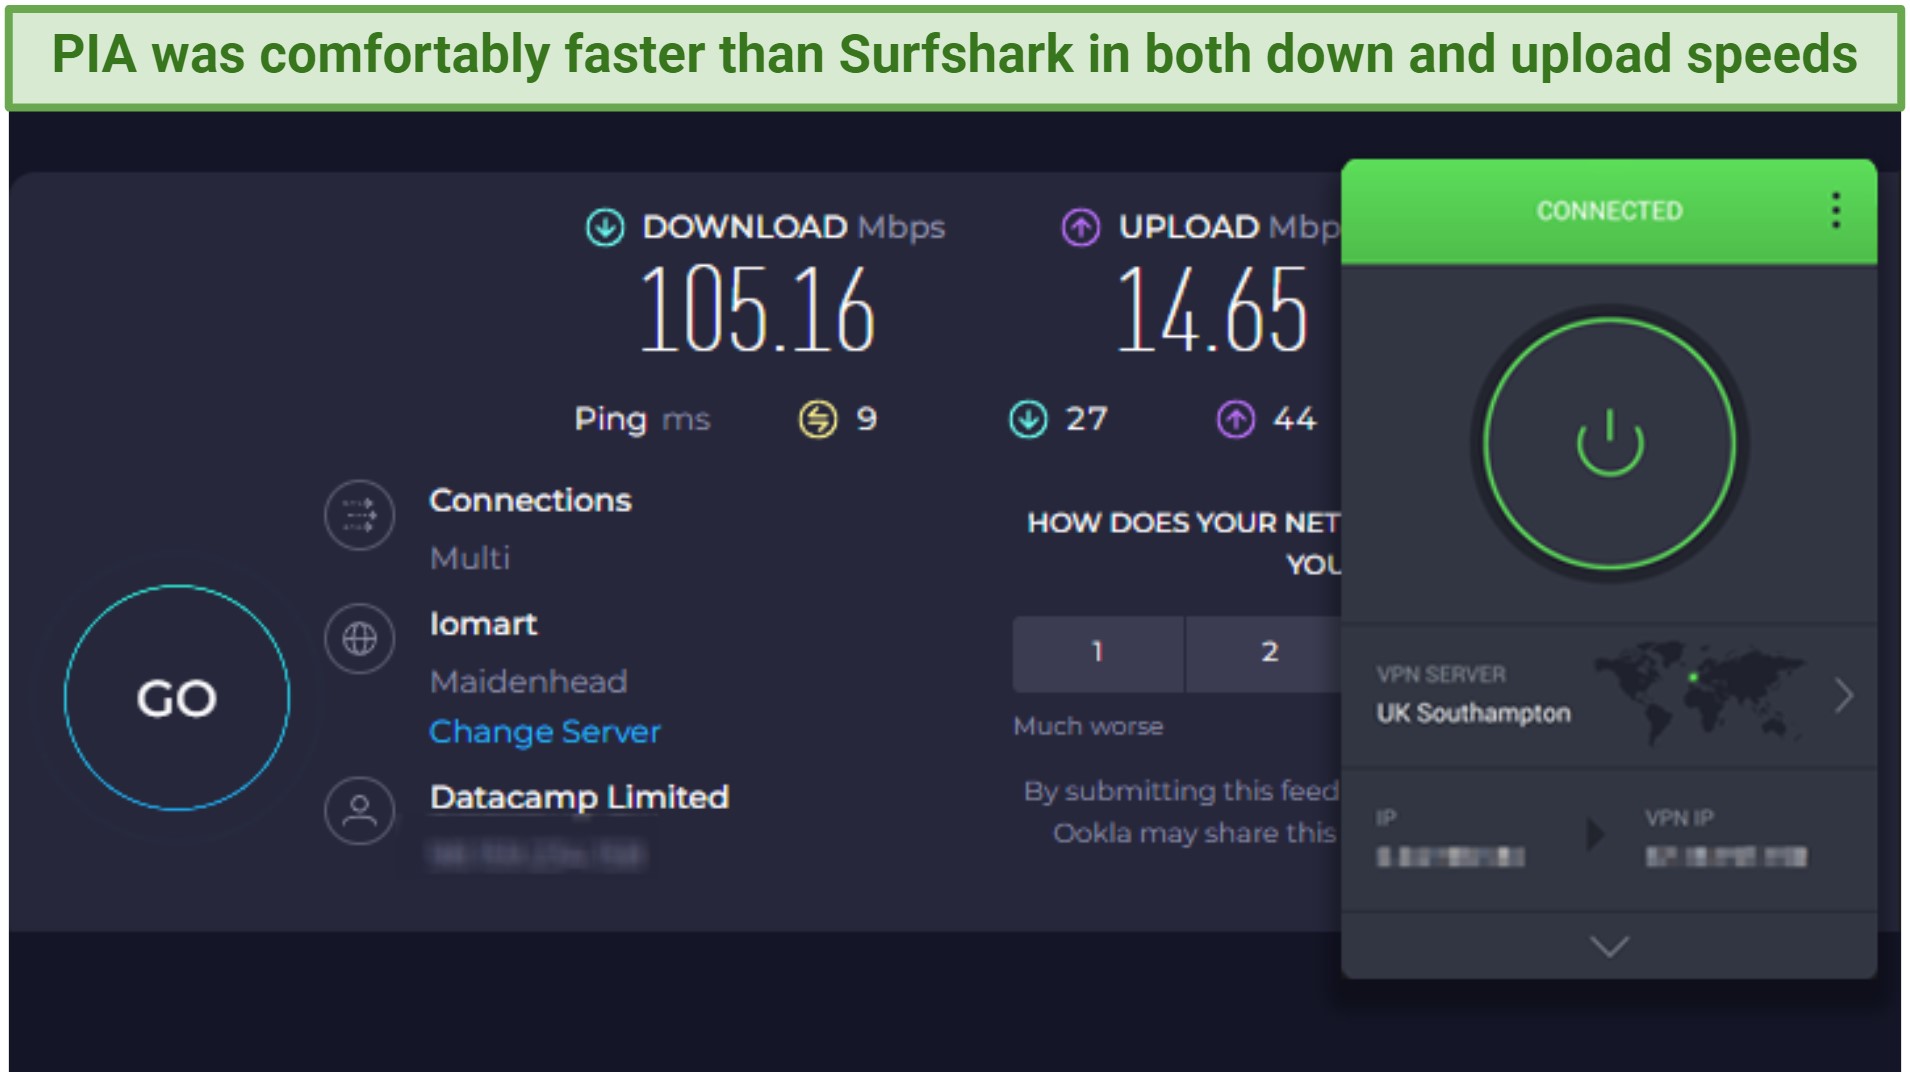 Screenshot of the PIA app connected to a server in the UK over an online speed test